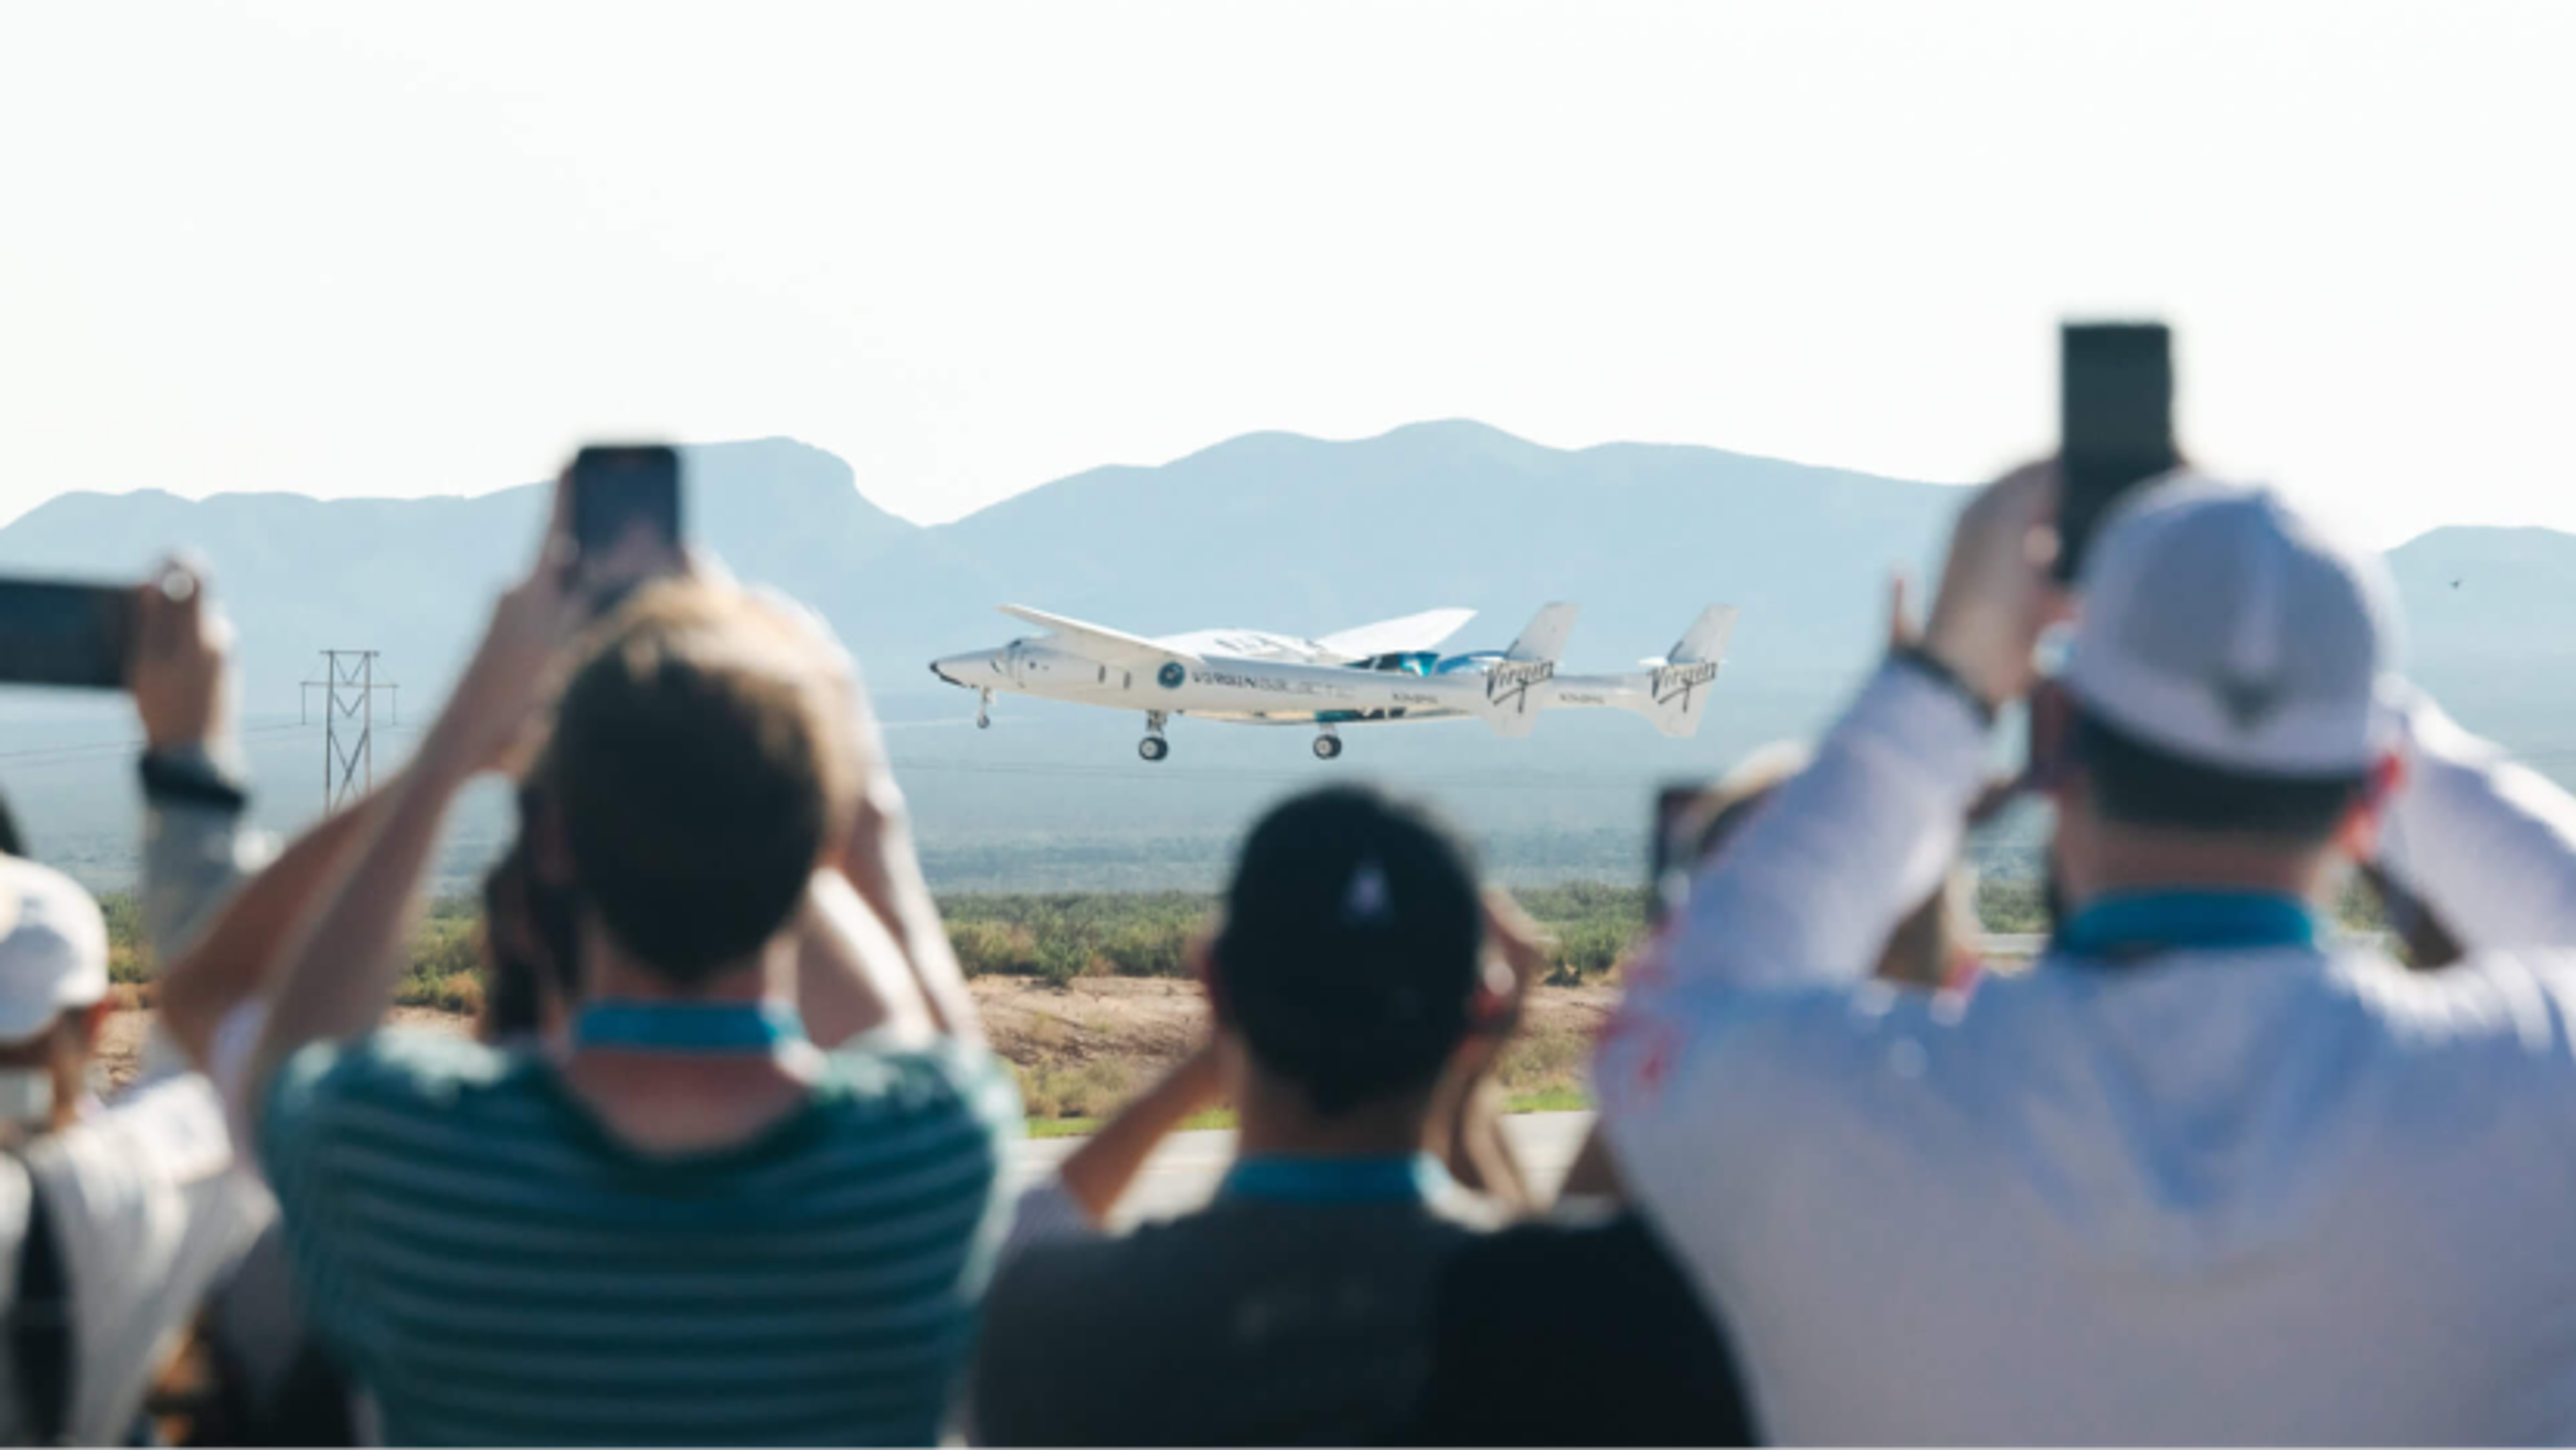 Virgin Galactic Unity 22 Launch, TAIT, Brand Experiences